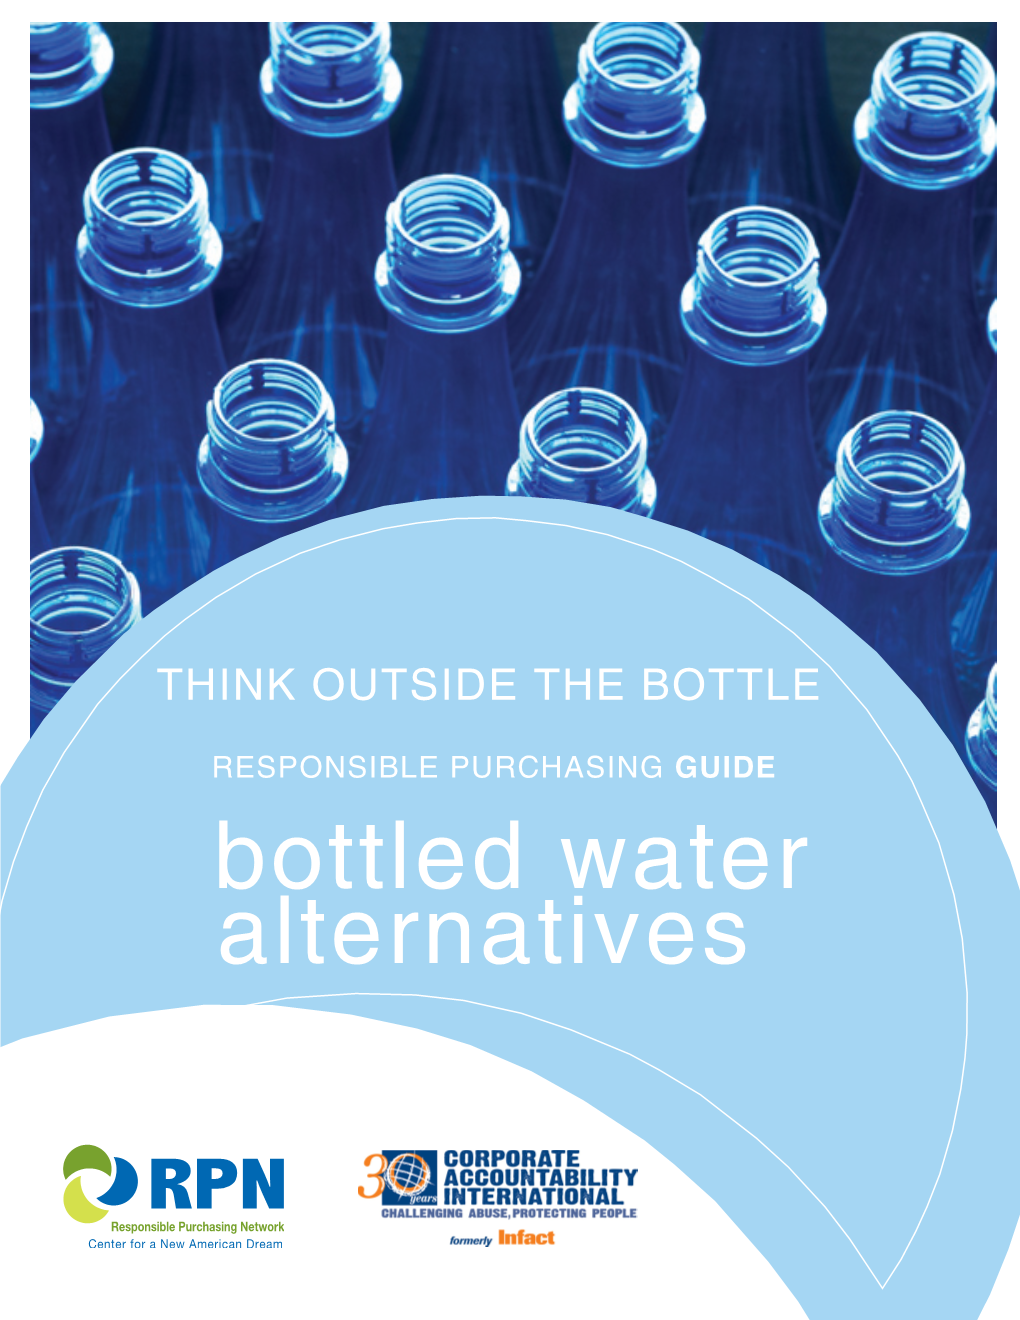 Bottled Water Alternatives Is a Joint Effort by the Responsible Purchasing Network and Corporate Accountability International